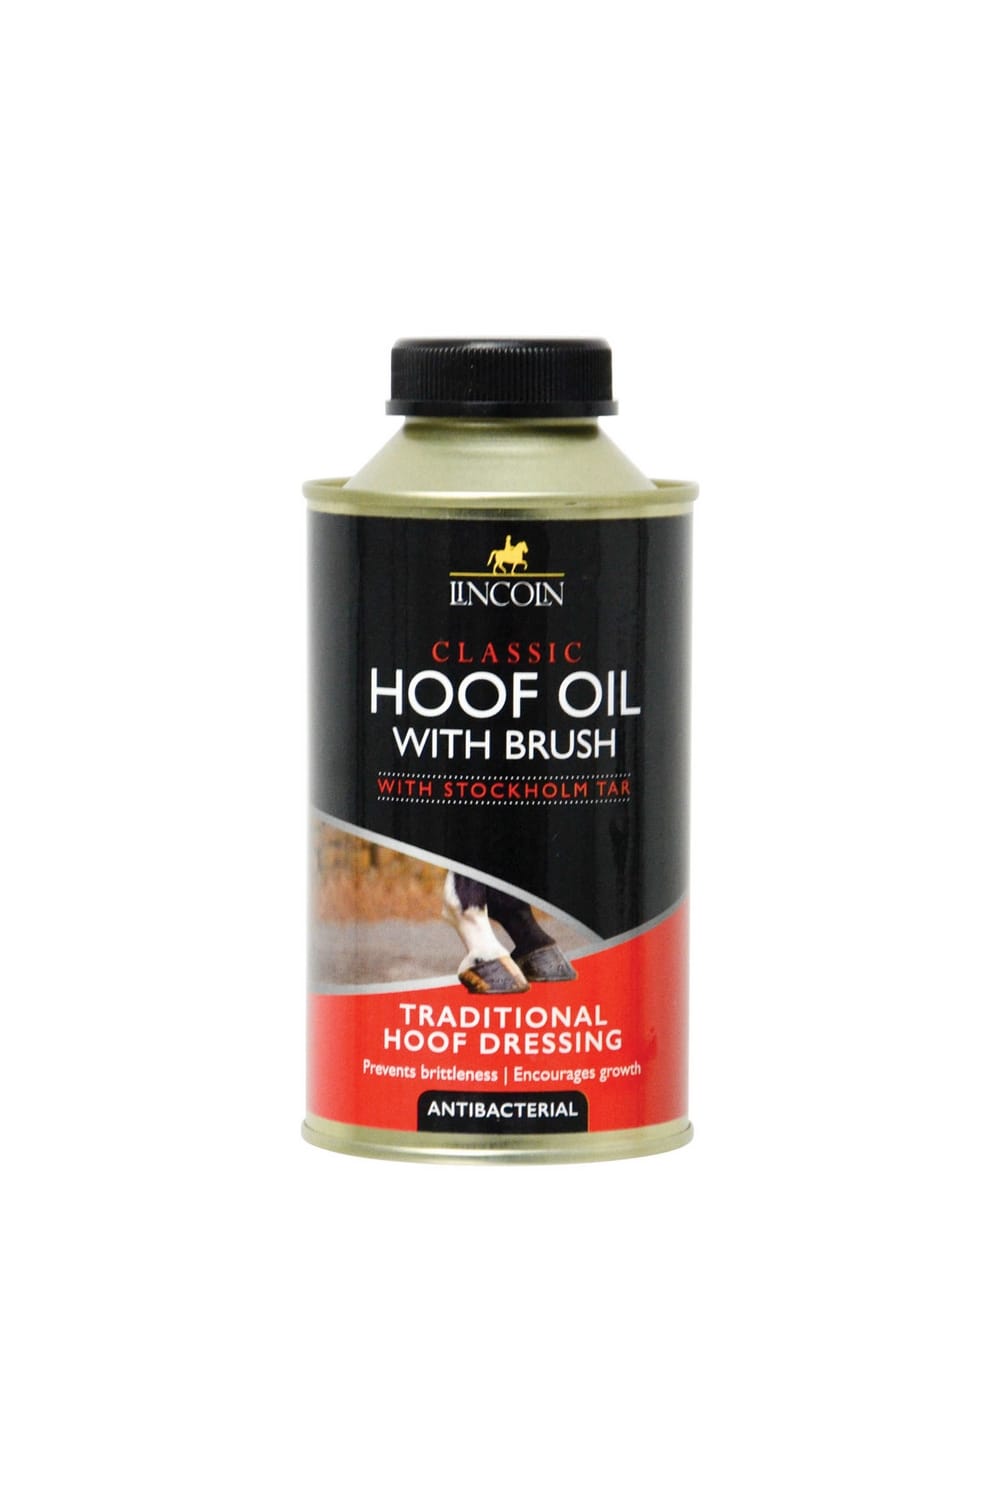 Lincoln Classic Liquid Hoof Oil With Brush (May Vary) (17 fl oz)